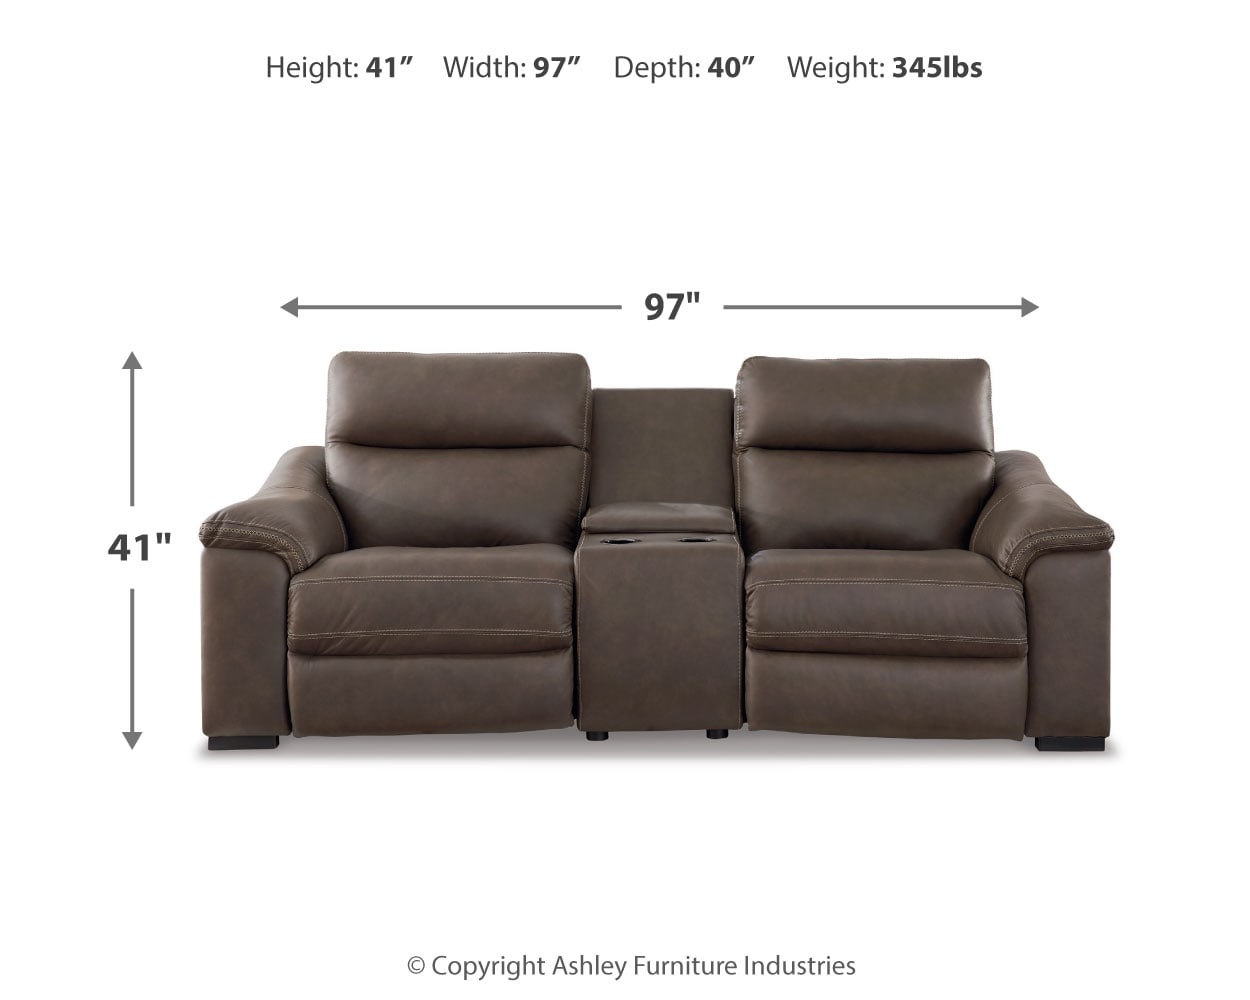 Salvatore 3-Piece Dual Power Leather Reclining Modular Loveseat with Console